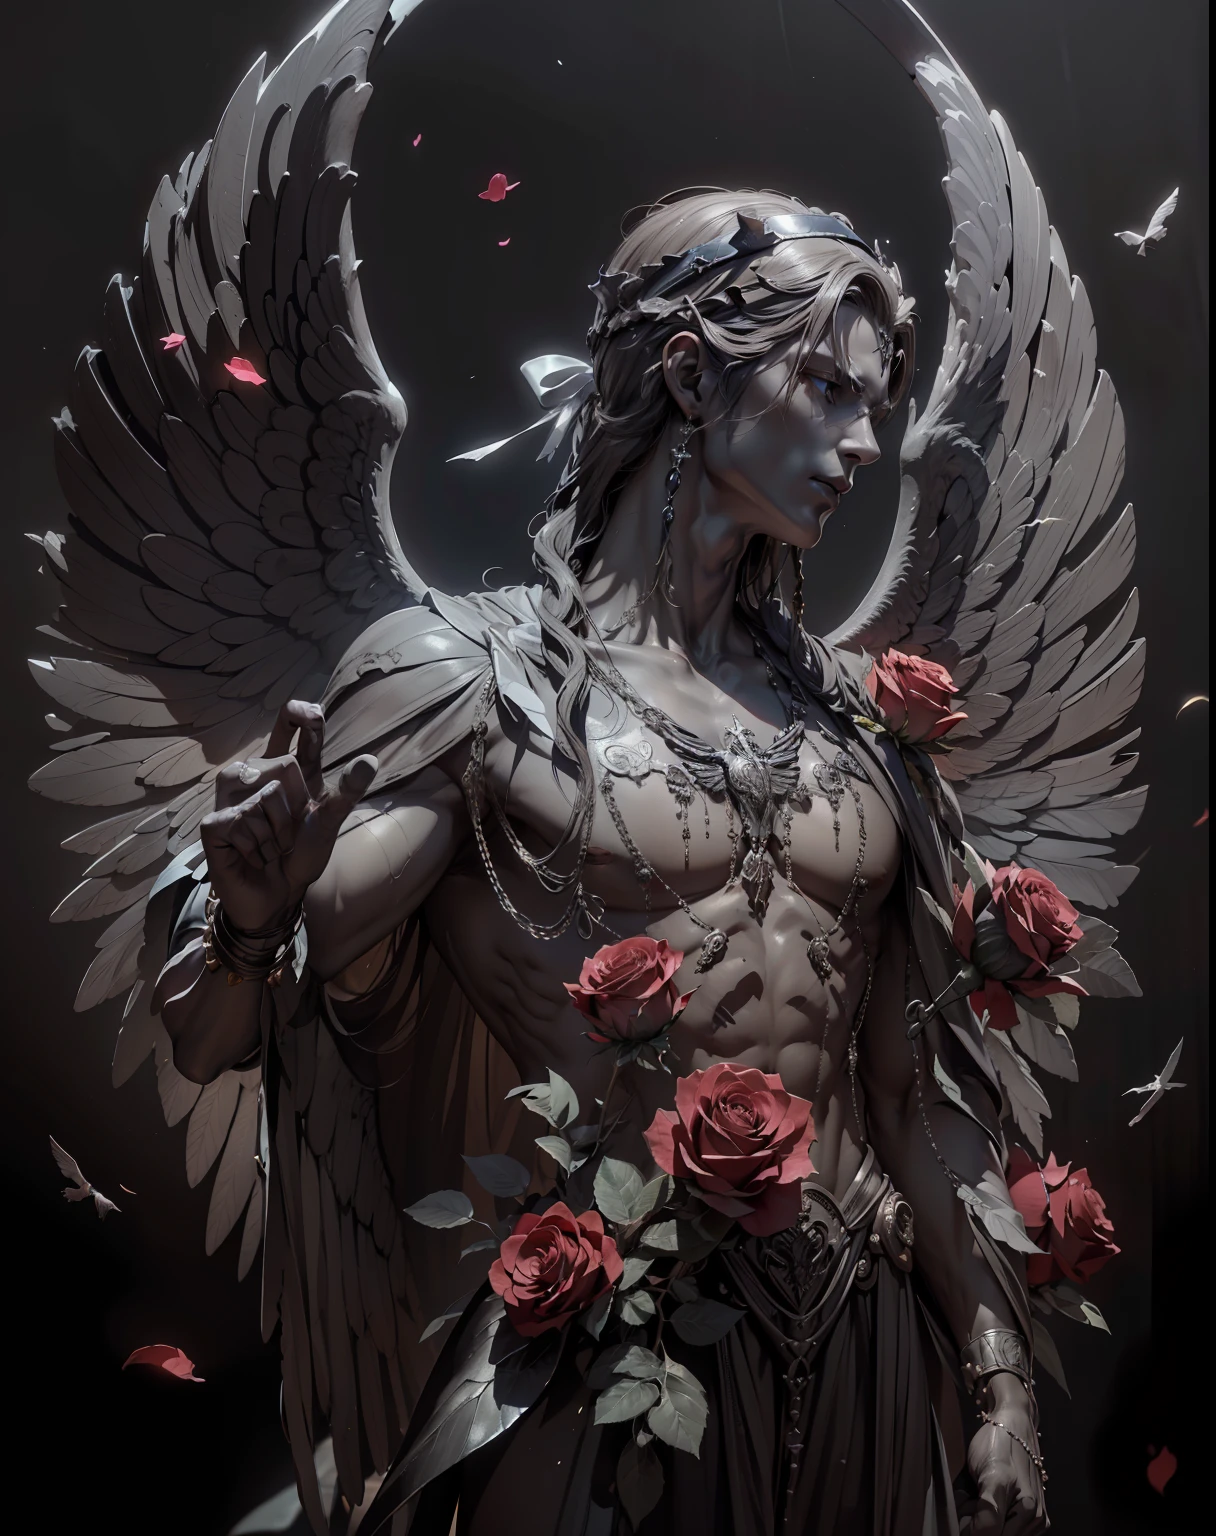 (Very detailed 8K wallpapers), medium plan,(Masterpiece, Top Quality, Best Quality), (headband),Statue with wings and roses on the chest and wings around the body, Greek Satuia,Male statue, male,with a dark background, Bastien L. Deharm, Dark art, marble sculpture, Gothic artintricate, higly detailed, dramatic